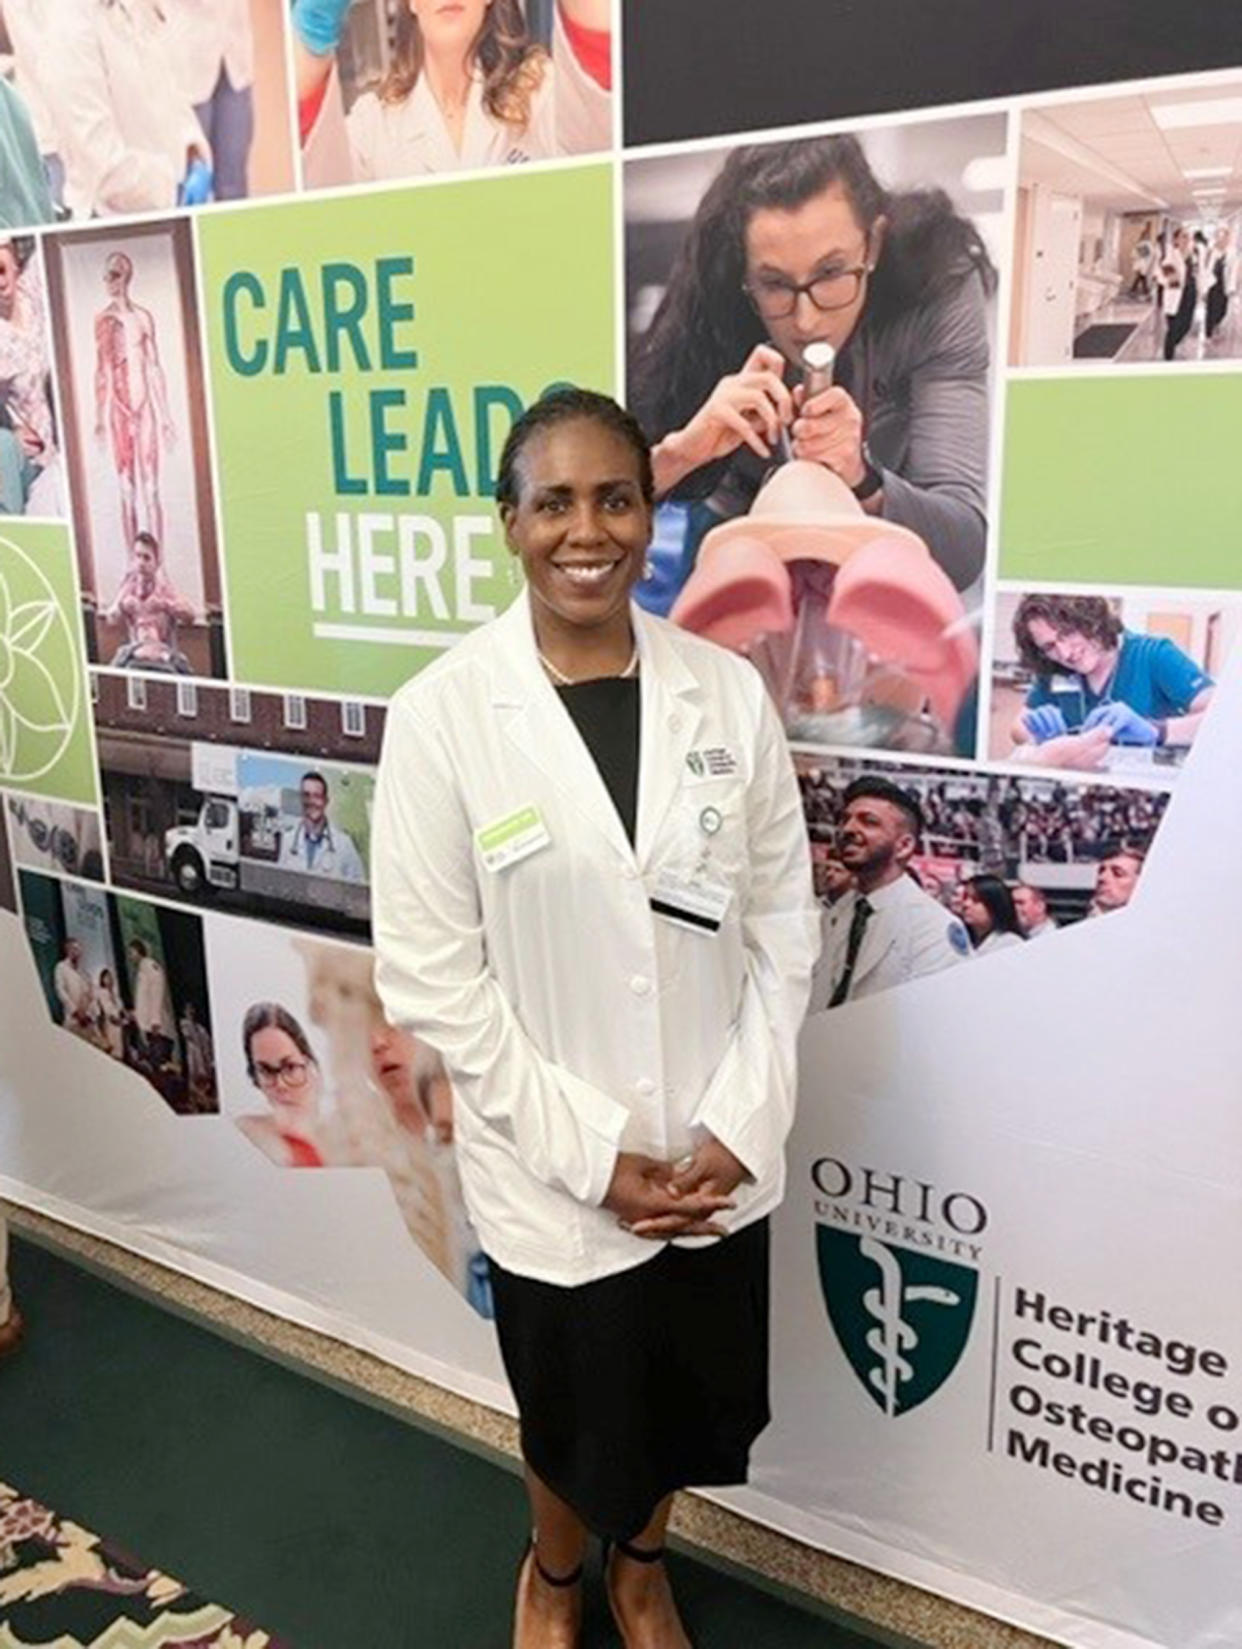 Changing careers at any time can feel daunting, but Shamone Gore Panter says she thinks she has a real opportunity to foster trust between the Black community and the medical profession. (Courtesy Shamone Gore Panter)